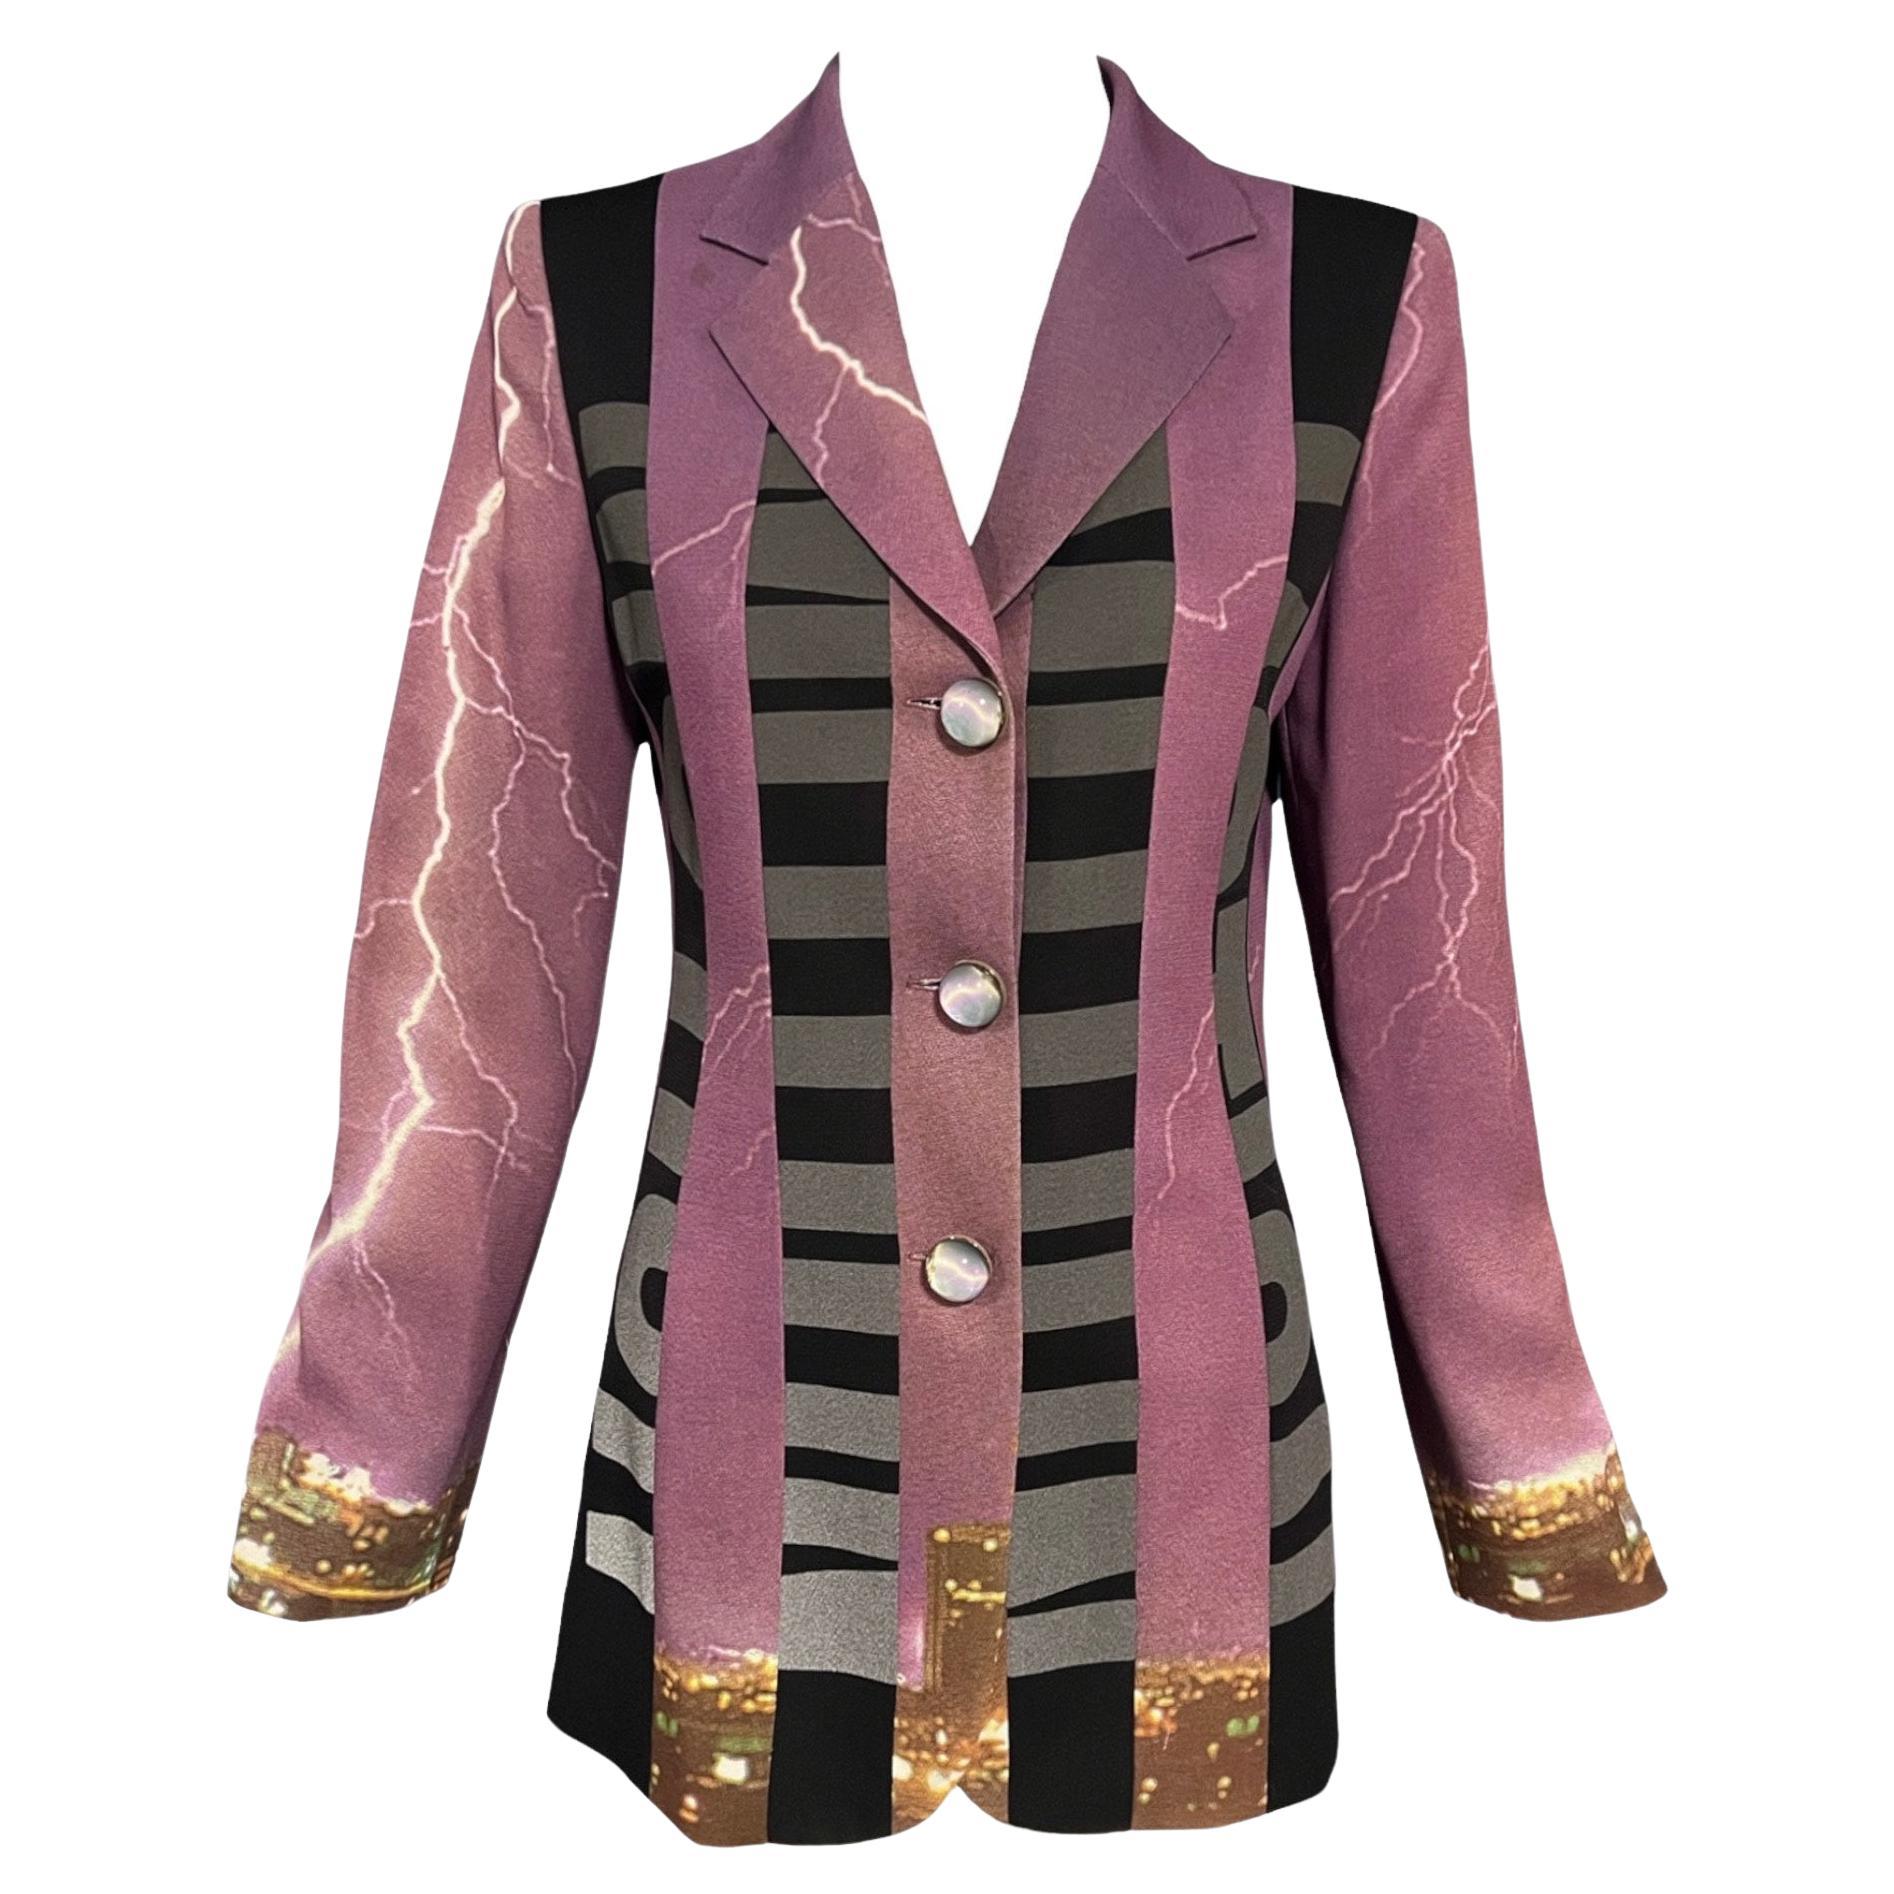 Moschino Cheap & Chic Vintage Lightning Energy Blazer For Sale